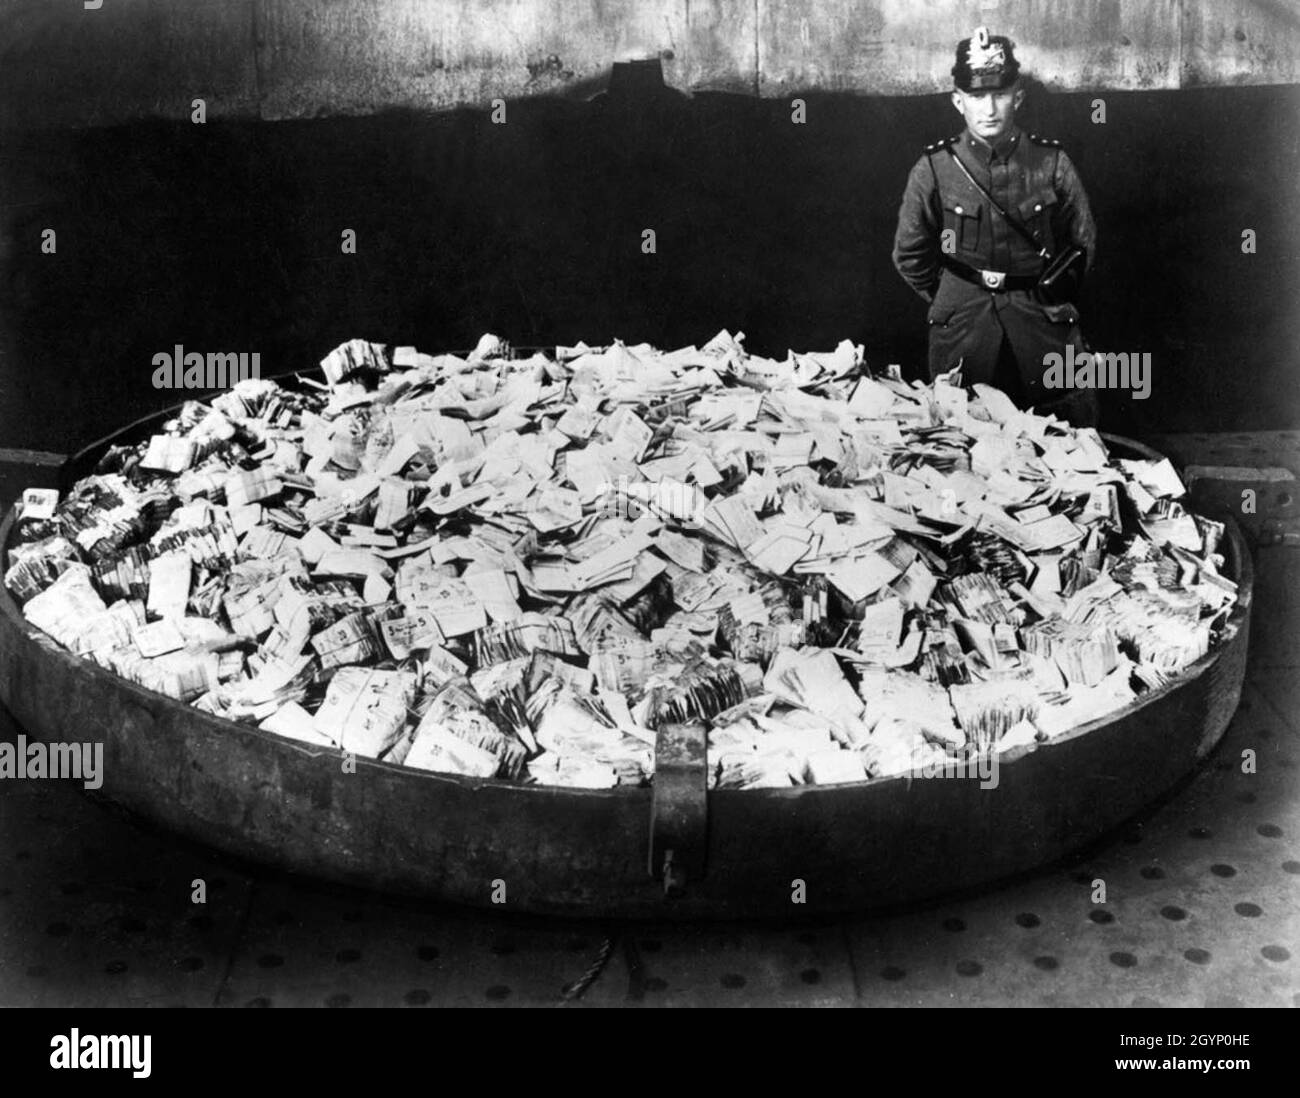 A huge container full of worthless money during the German hyperinflation period Stock Photo